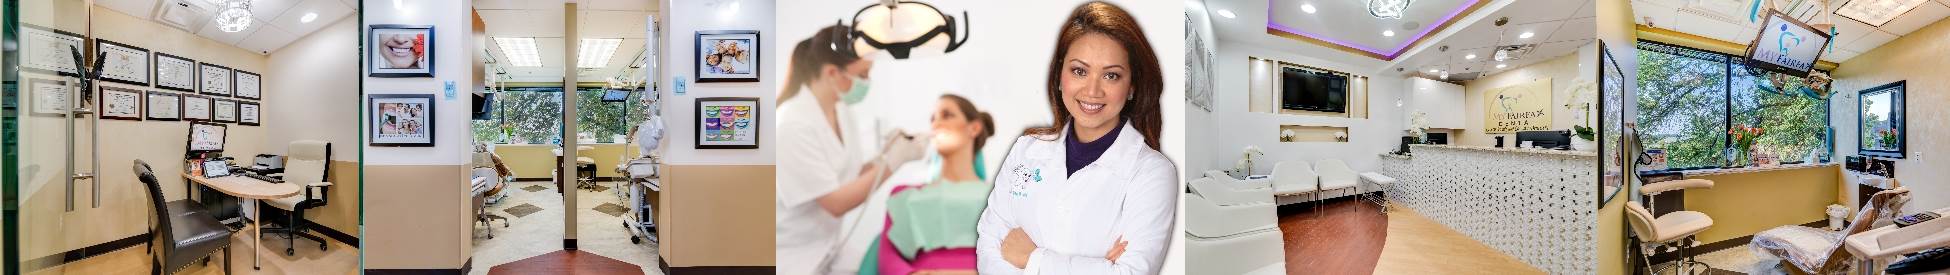 Regular Dental Exams For Seniors And Why They Are Important